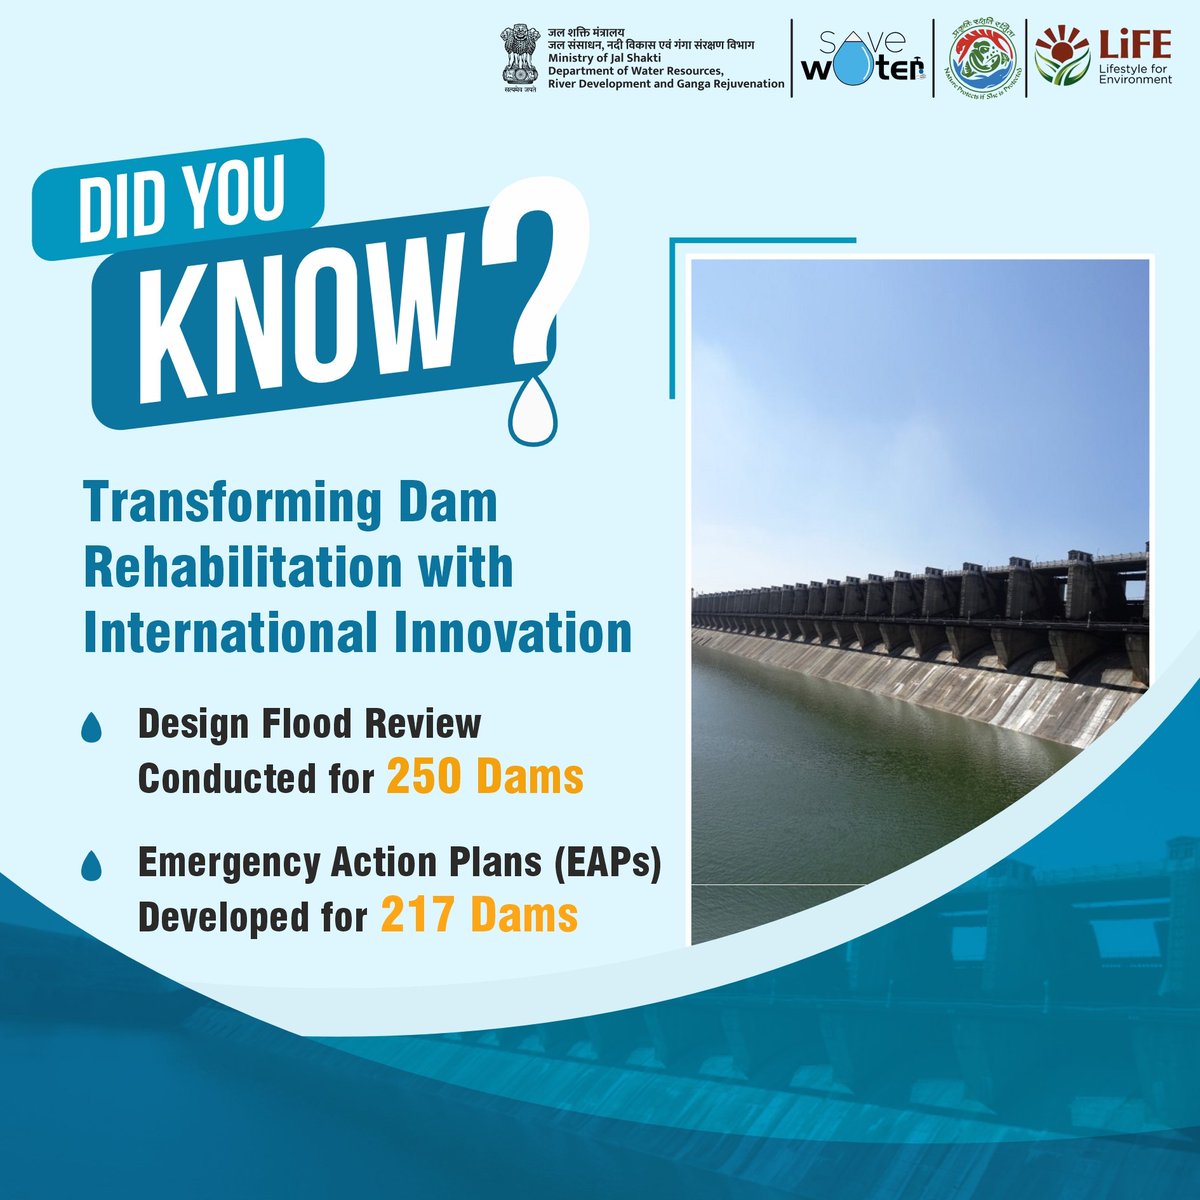 Breaking barriers in dam rehabilitation! The #DRIP program is leading the way with innovative international practices, enhancing water security and community safety worldwide. Learn how DRIP is reshaping infrastructure for a sustainable future. #DidYouKNow #WaterSecurity #DoWR